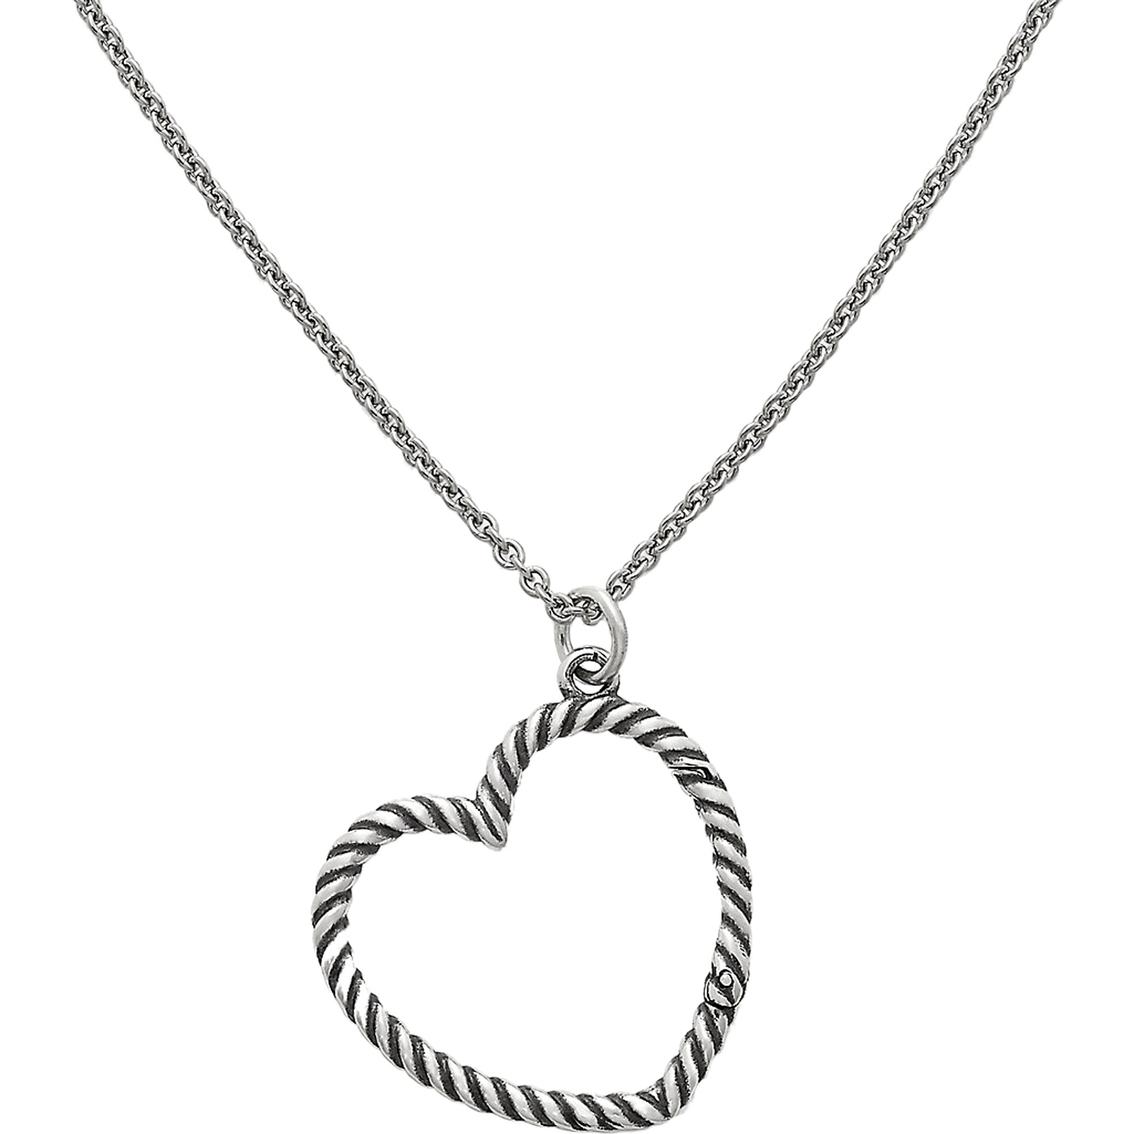 James Avery Sterling Silver Changeable Heart Charm Holder Necklace - Image 2 of 3